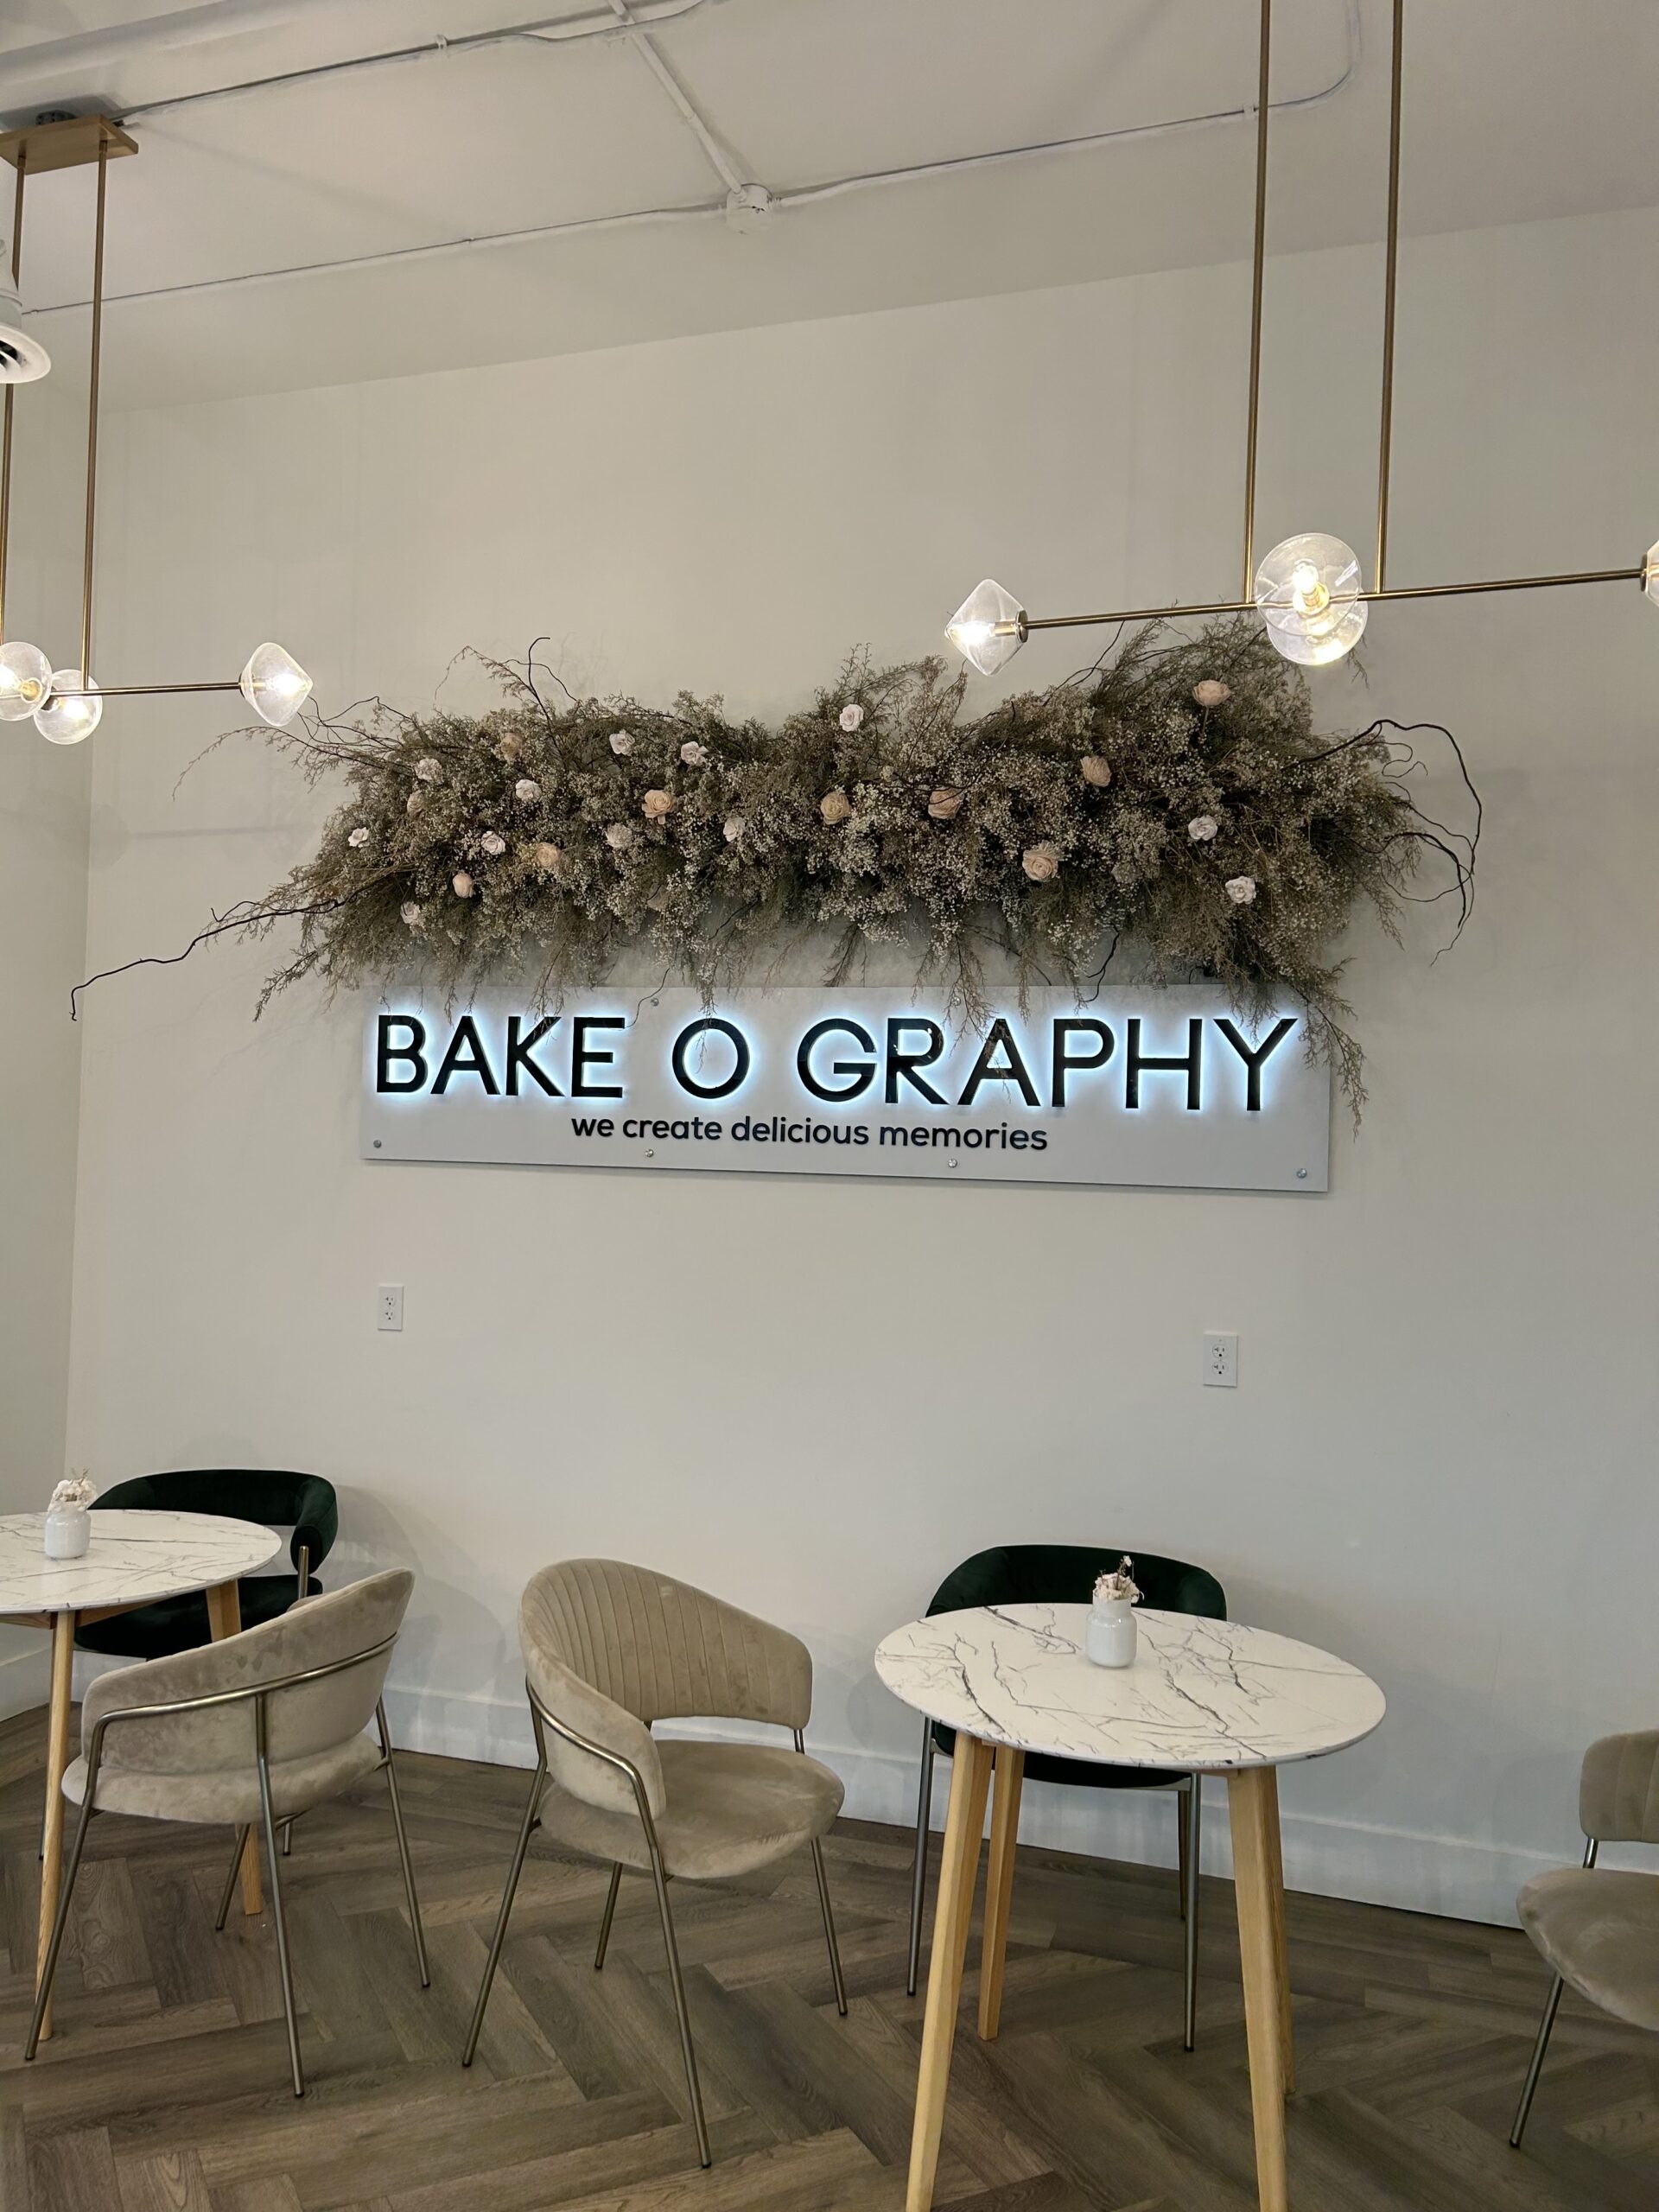 BAKEOGRAPHY CAFE AND PATISSERIE | Business | d4u.ca